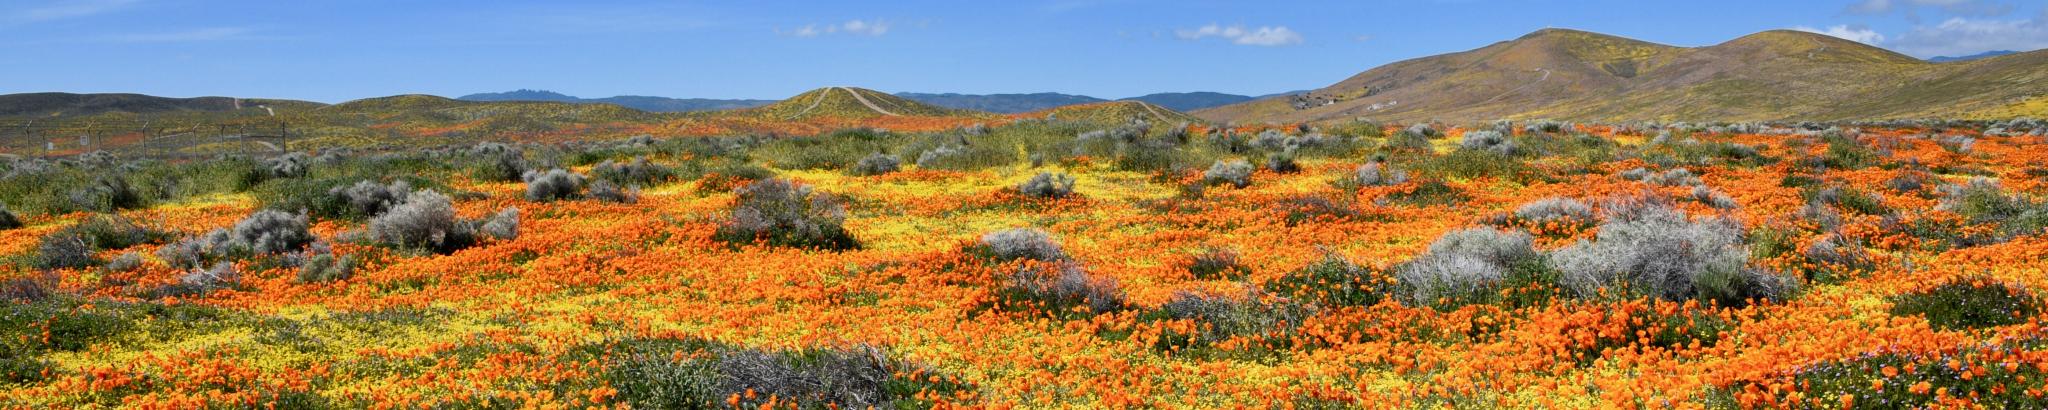 A sea of poppies and other wildflowers